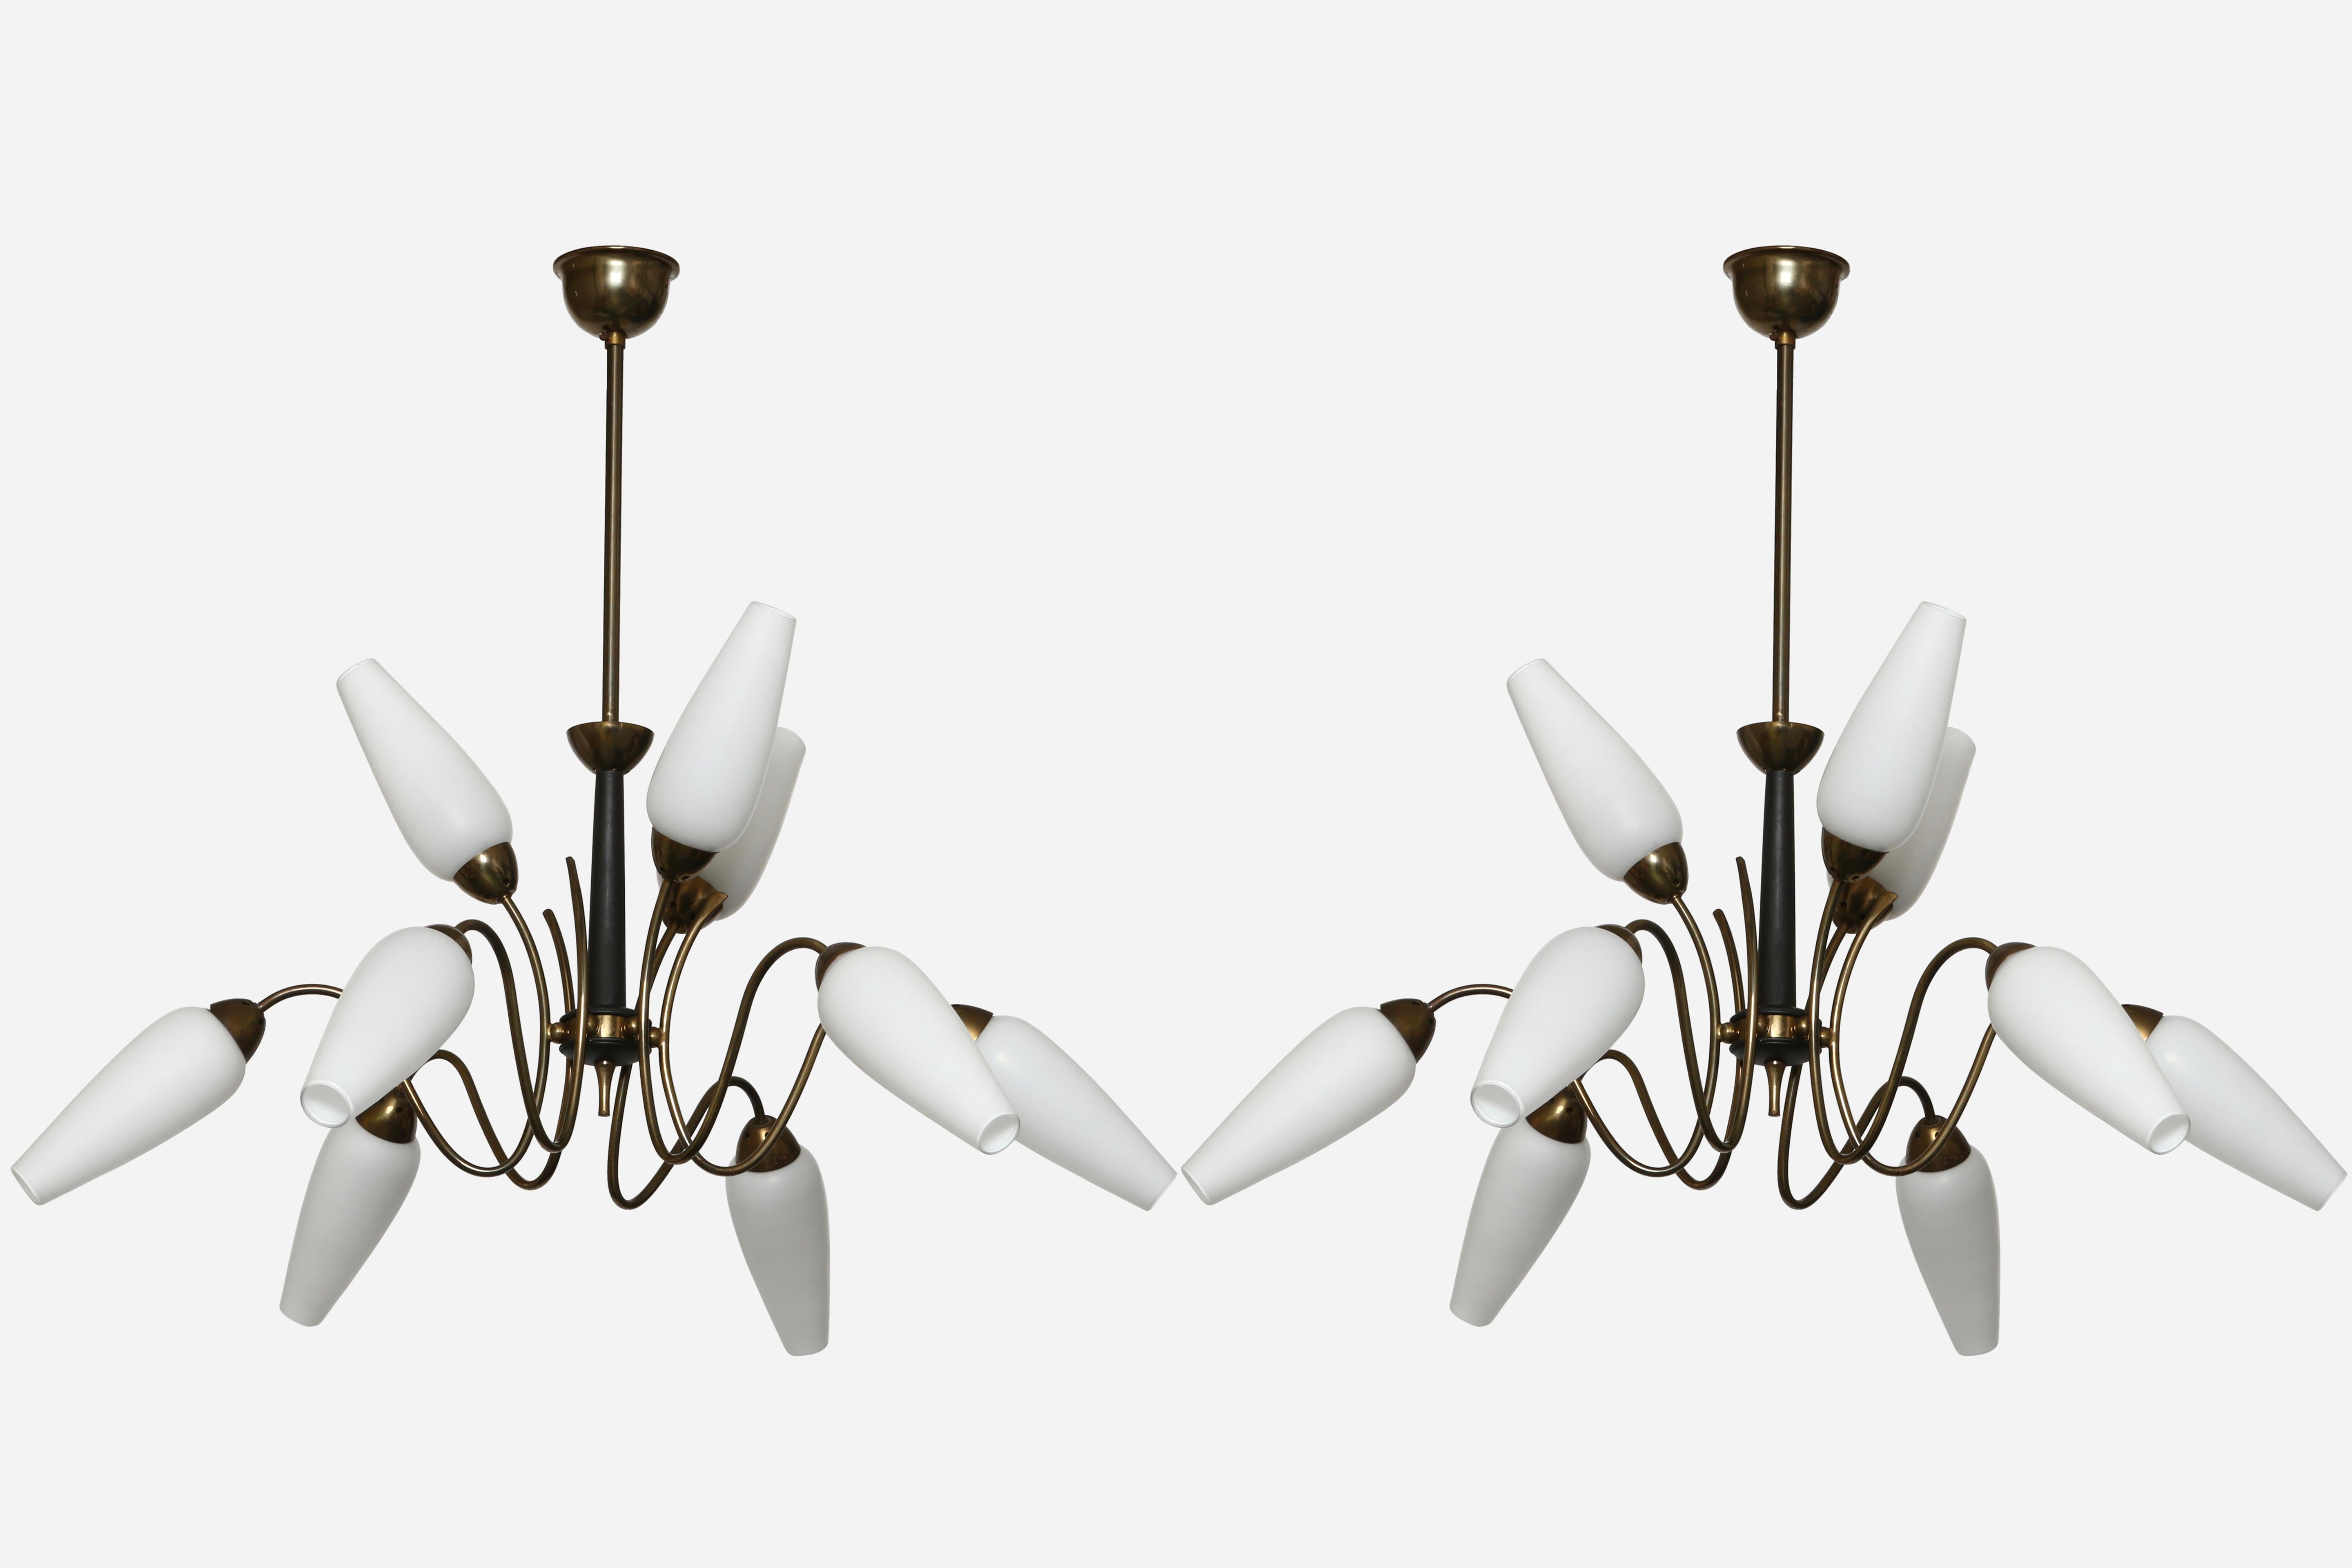 Stilnovo style chandeliers, a pair
Italy 1960s
Nine arms with tulip shaped glass.
Nine candelabra sockets.
Complimentary US rewiring upon request.
Overall drop is adjustable. Can be shorter.

We take pride in bringing vintage fixtures to their full